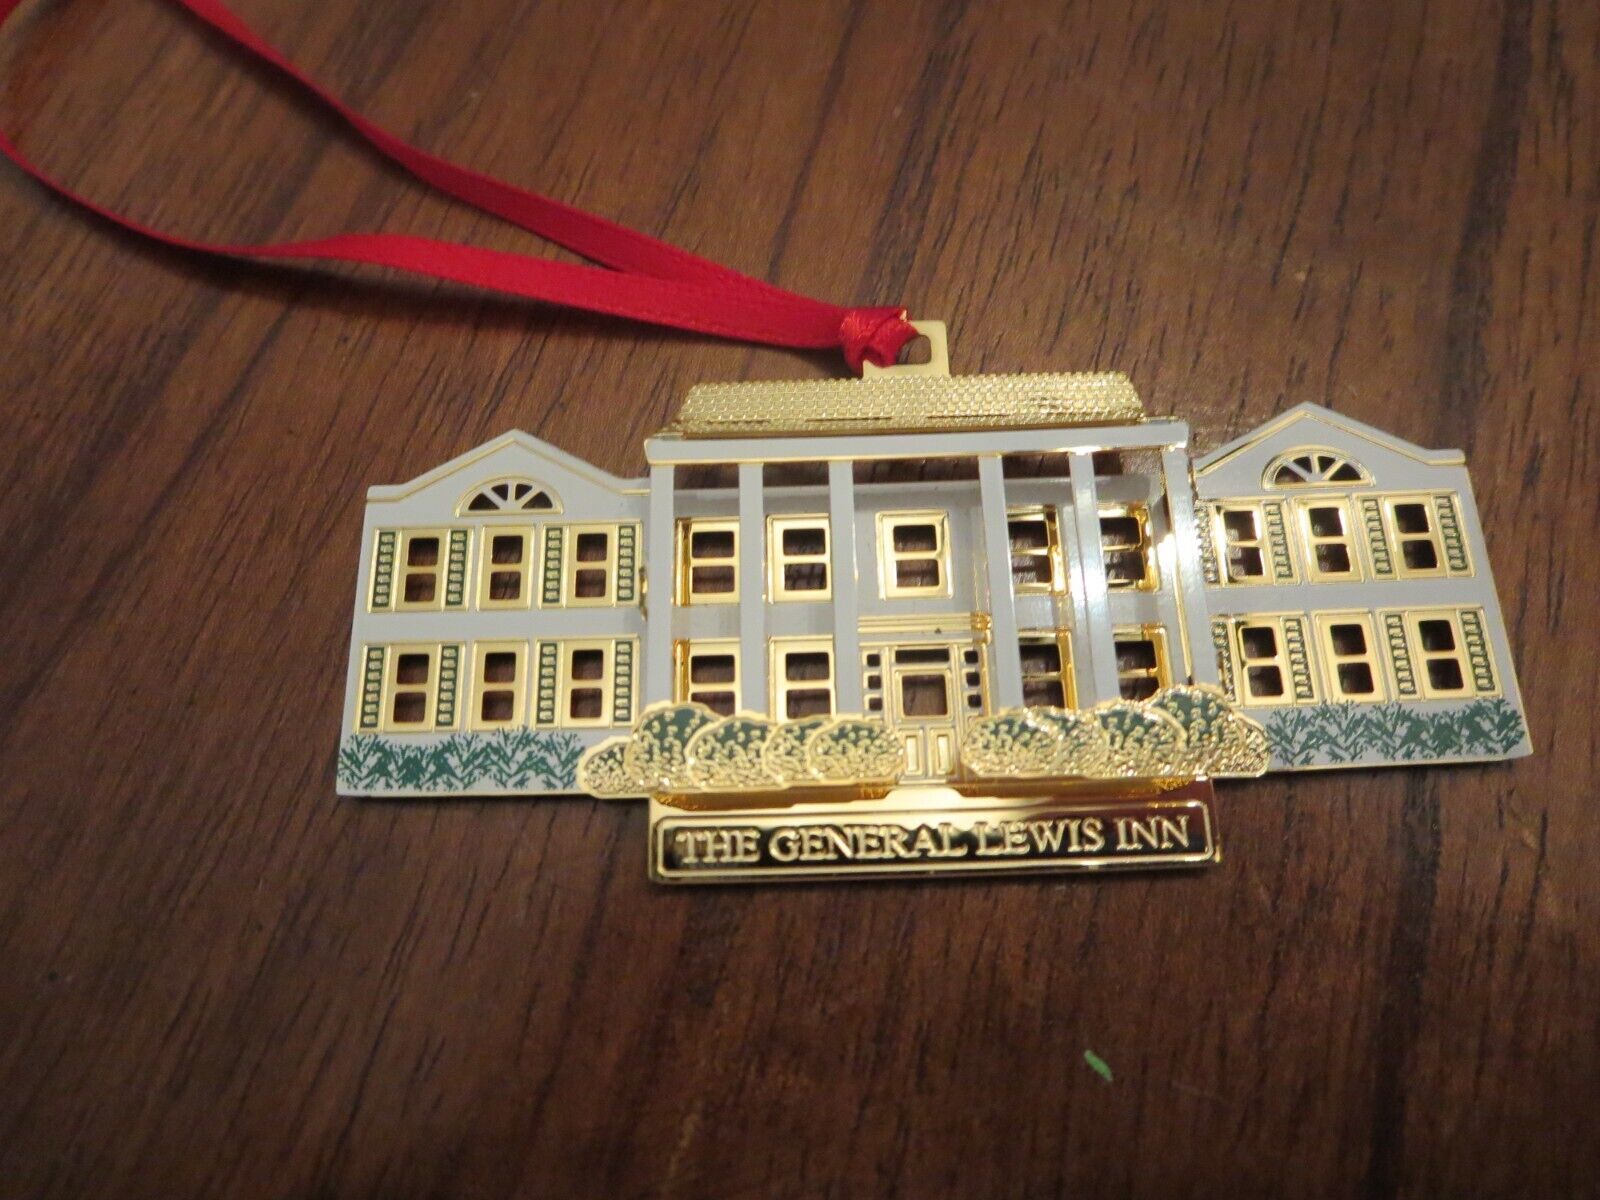 2nd Annual Greenbrier County West Virginia Ornament General Lewis Inn